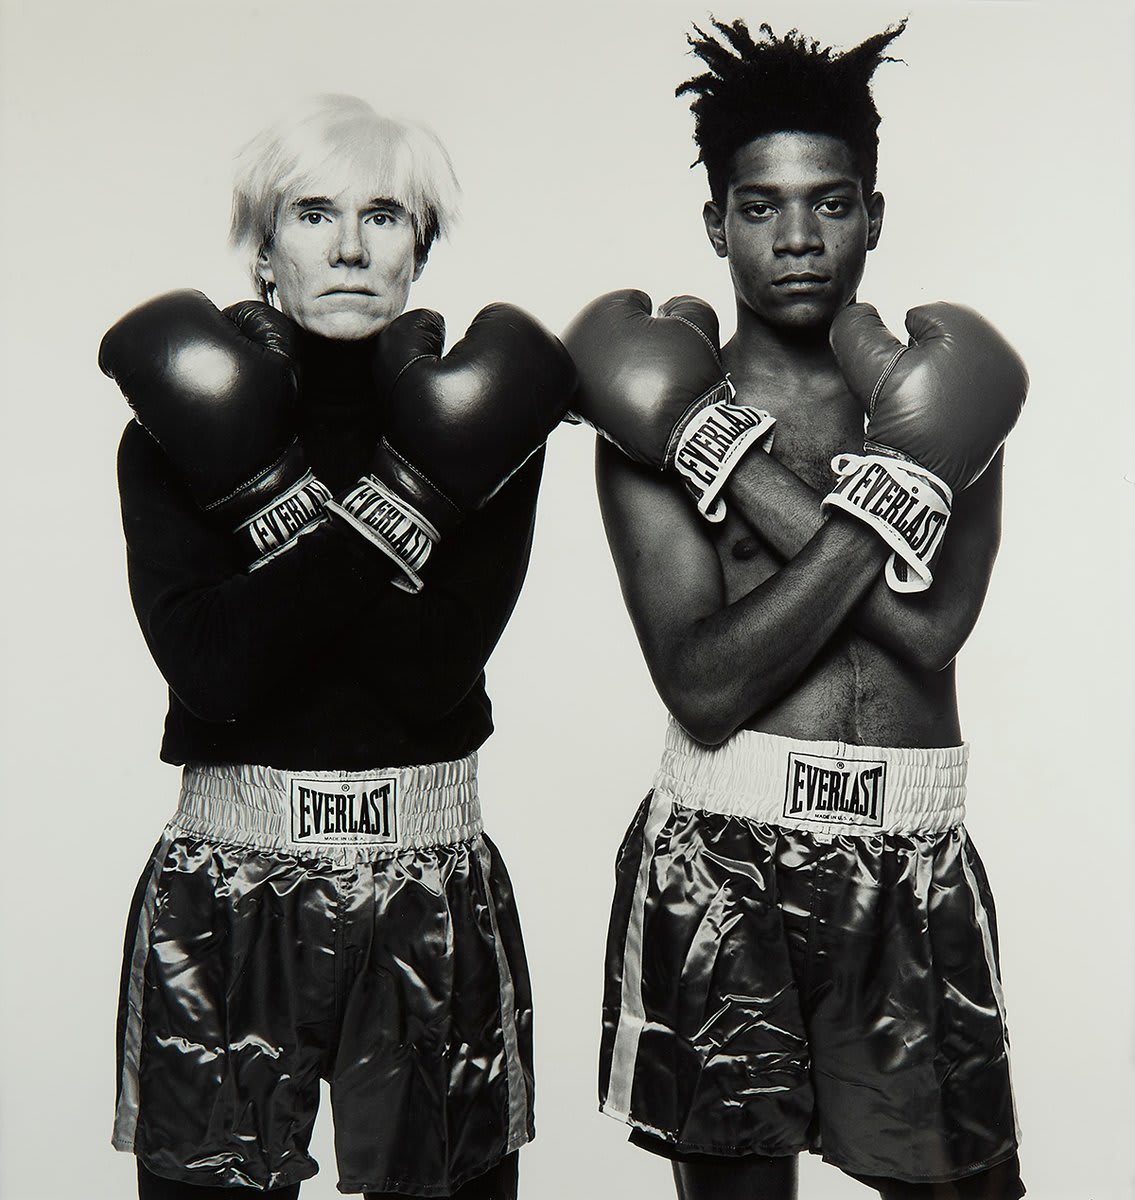 On Thursday, June 11, @swanngalleries will hold a sale of fine photographs that highlights images by Diane Arbus, Robert Mapplethorpe, and Michael Halsband. https://t.co/d3DCAHGqhF ©Michael Halsband, Andy Warhol and Jean-Michael Basquiat, silver print, 1985.